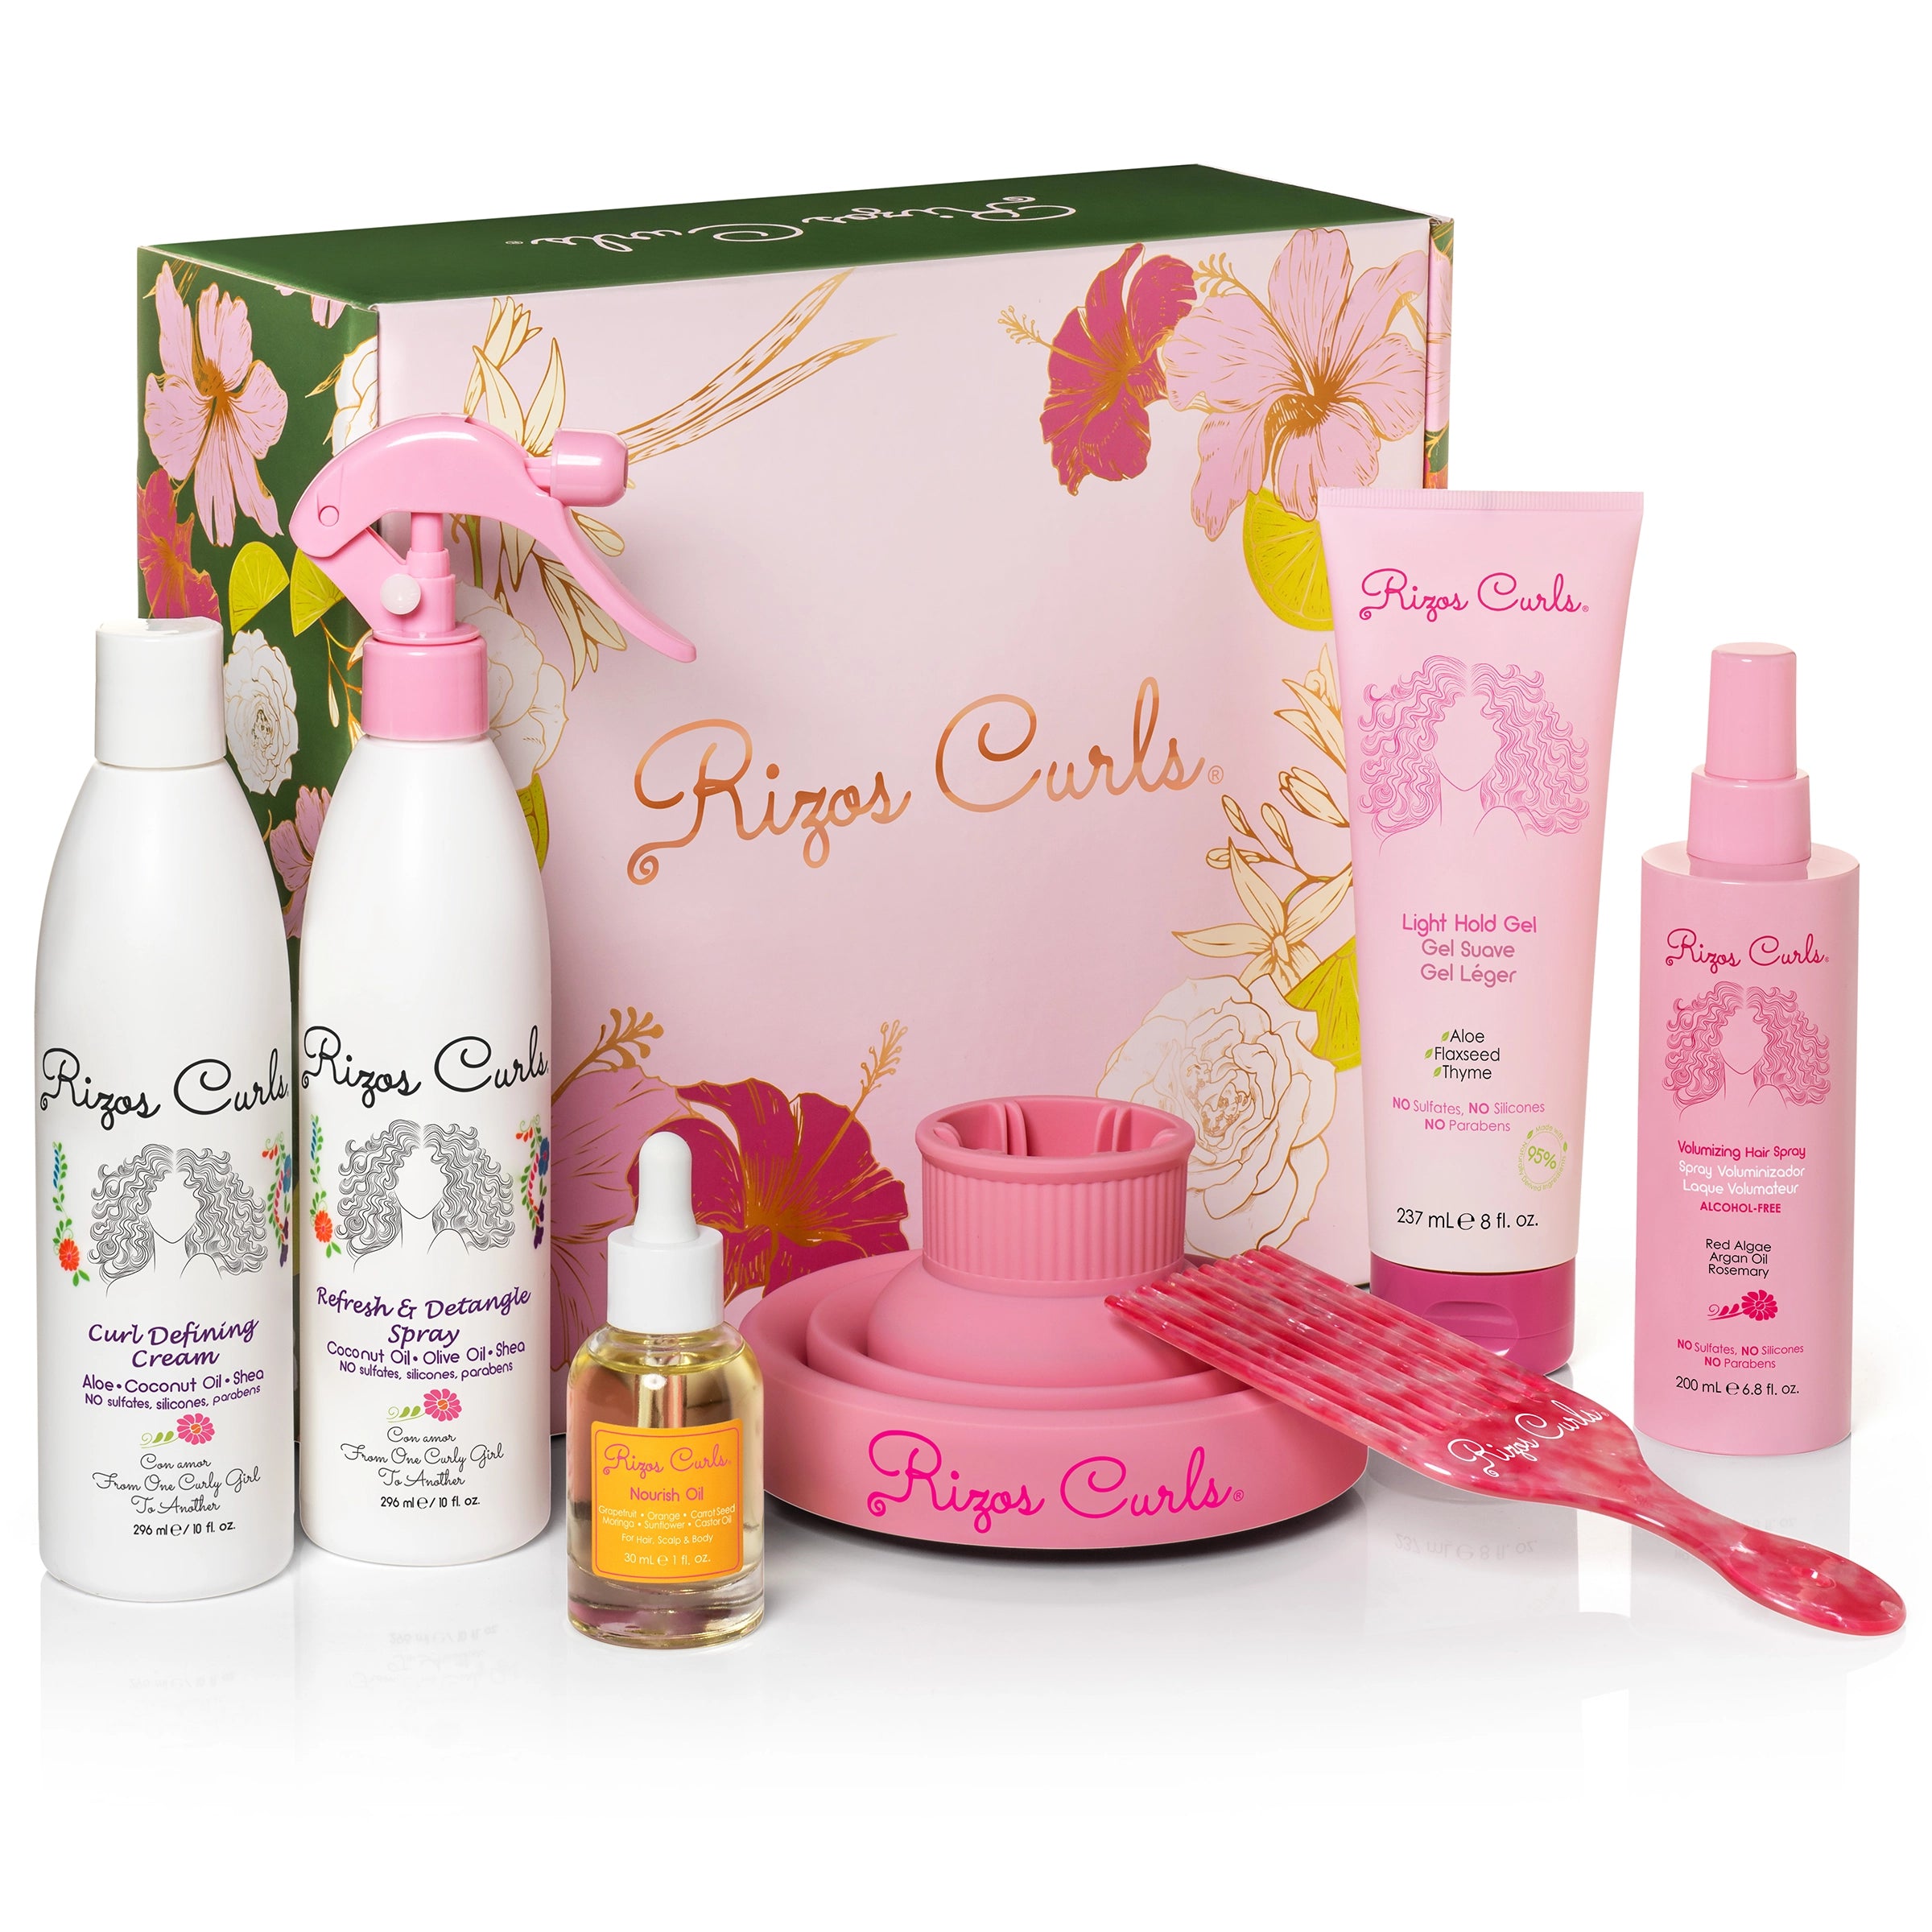 New Limited Edition VIP Box: The Complete Rizos Curls Styling Collection